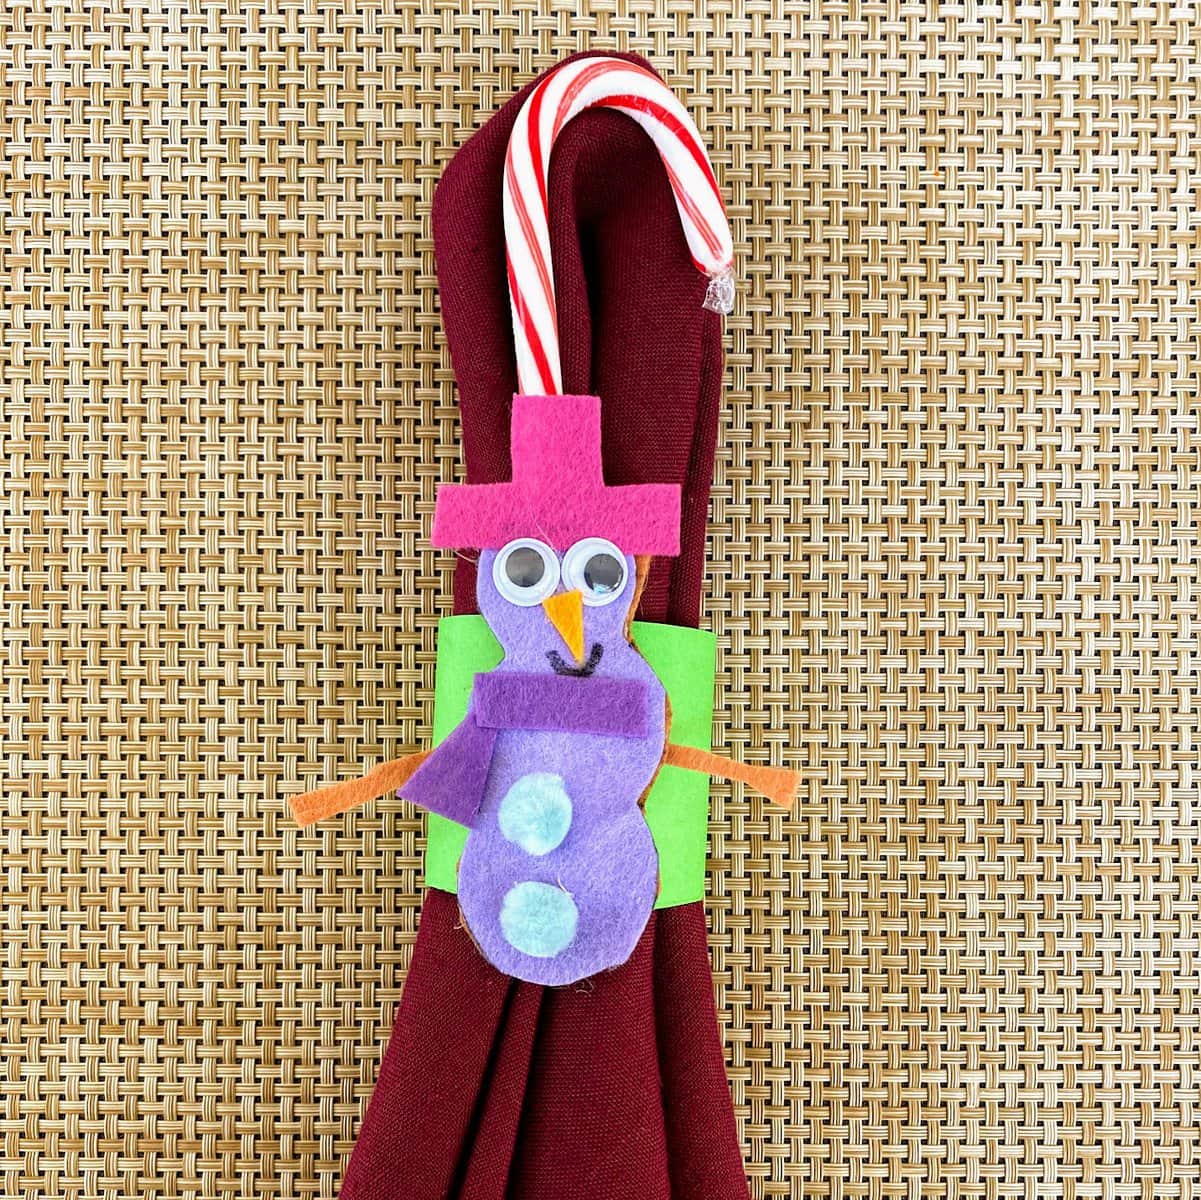 snowman candy cane holder and napkin ring 